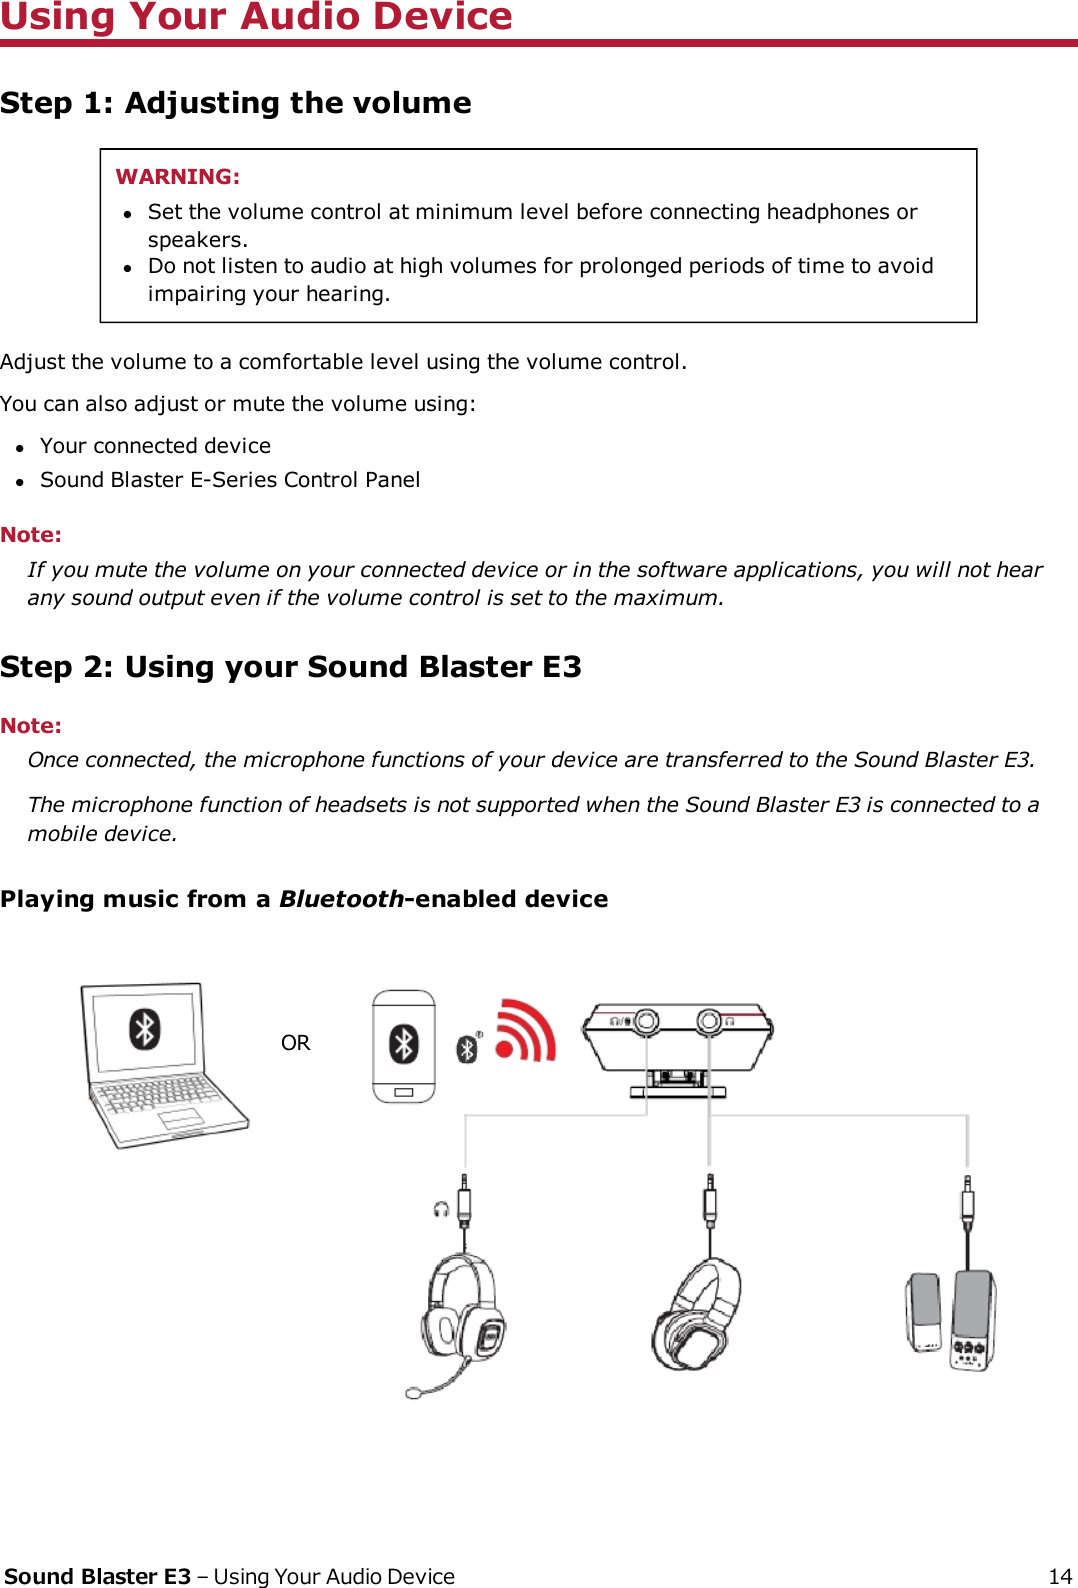 Using Your Audio DeviceStep 1: Adjusting the volumeWARNING:lSet the volume control at minimum level before connecting headphones orspeakers.lDo not listen to audio at high volumes for prolonged periods of time to avoidimpairing your hearing.Adjust the volume to a comfortable level using the volume control.You can also adjust or mute the volume using:lYour connected devicelSound Blaster E-Series Control PanelNote:If you mute the volume on your connected device or in the software applications, you will not hearany sound output even if the volume control is set to the maximum.Step 2: Using your Sound Blaster E3Note:Once connected, the microphone functions of your device are transferred to the Sound Blaster E3.The microphone function of headsets is not supported when the Sound Blaster E3 is connected to amobile device.Playing music from a Bluetooth-enabled deviceORSound Blaster E3 – Using Your Audio Device 14